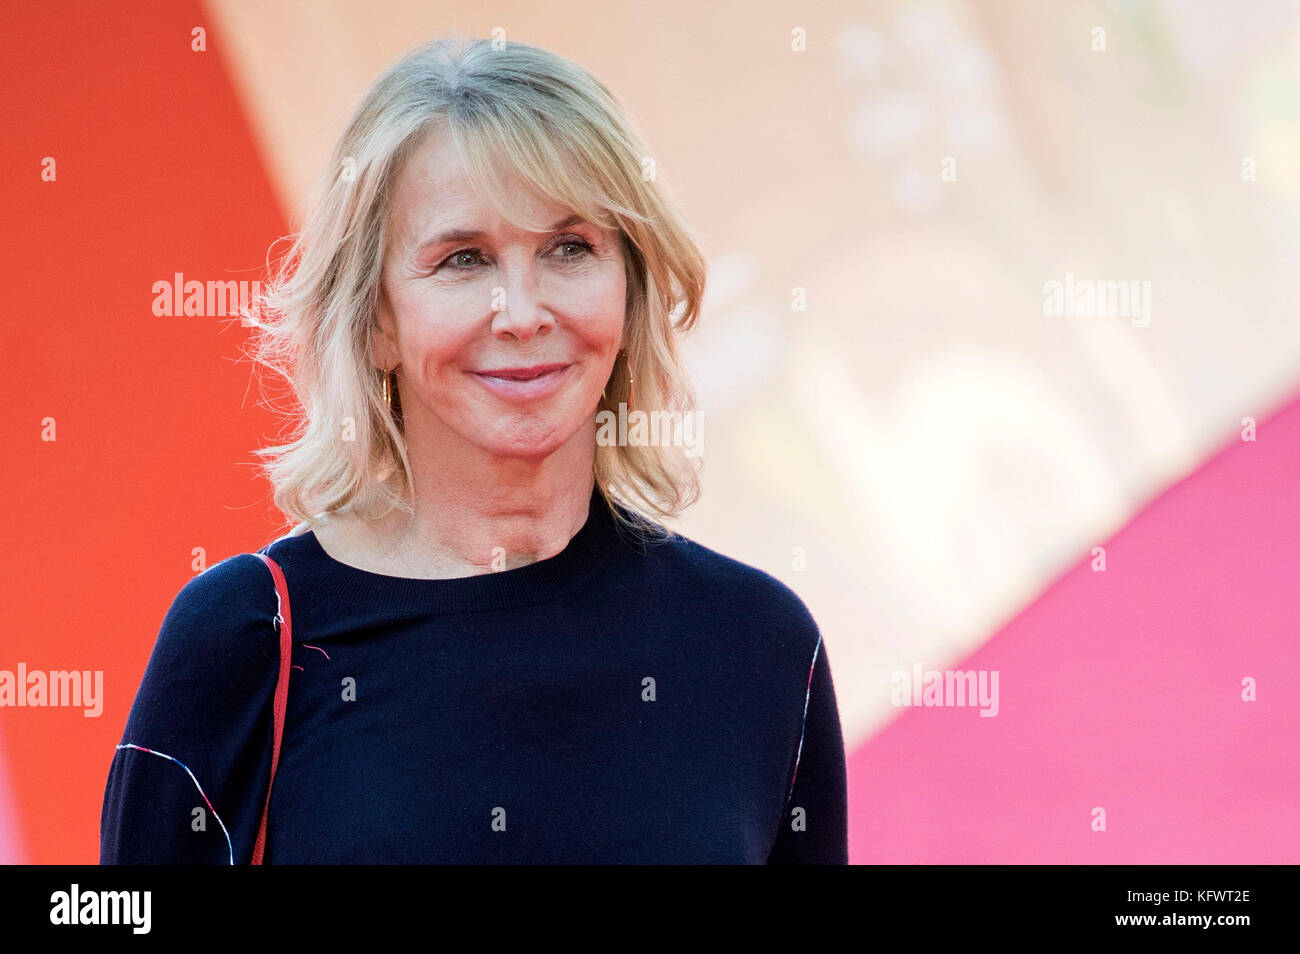 Rome, Italy. 1st November, 2017. Trudie Styler attends the 'Freak Show' premiere during the 12th Rome Film Fest 2017 at Auditorium Parco della Musica on November 1, 2017 in Rome, Italy. Credit: Geisler-Fotopress/Alamy Live News Stock Photo